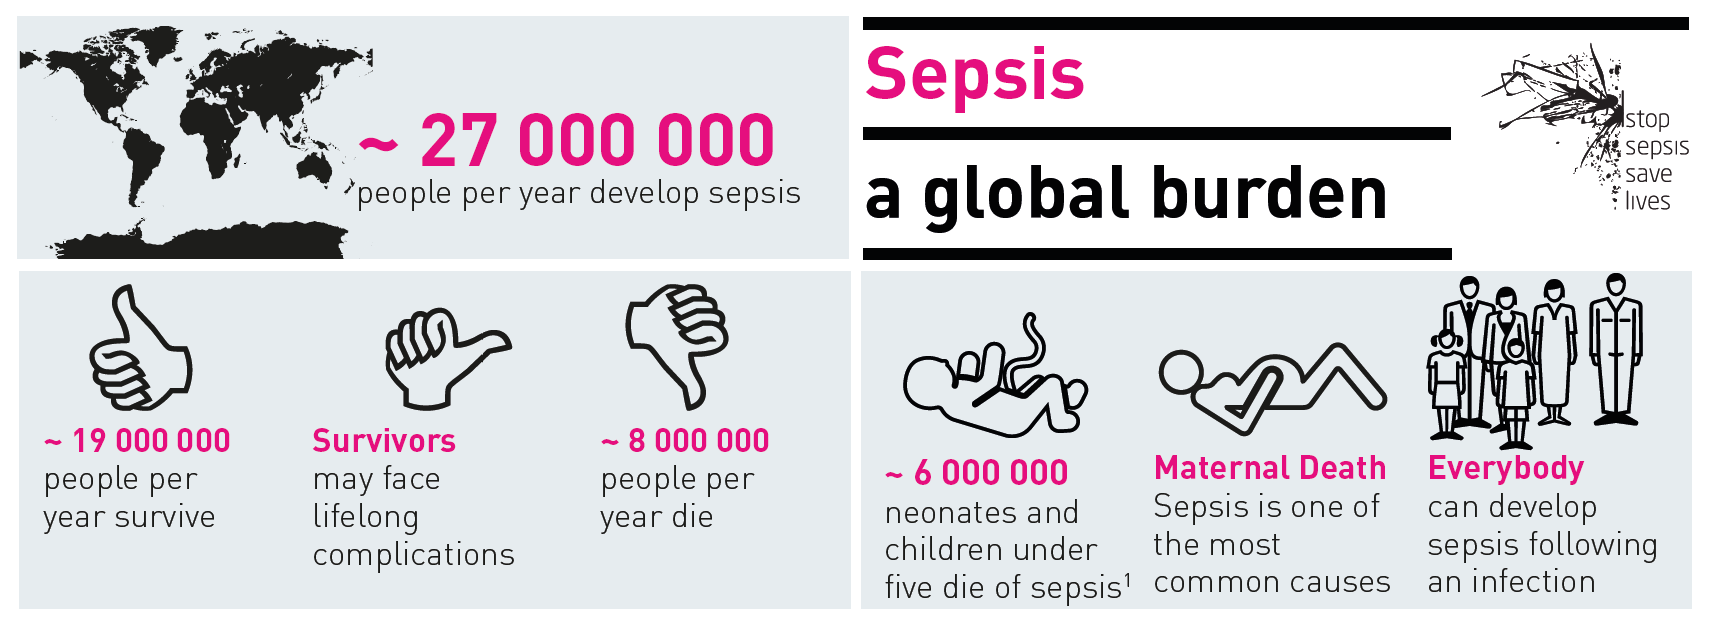 Sepsis is a life-threatening problem